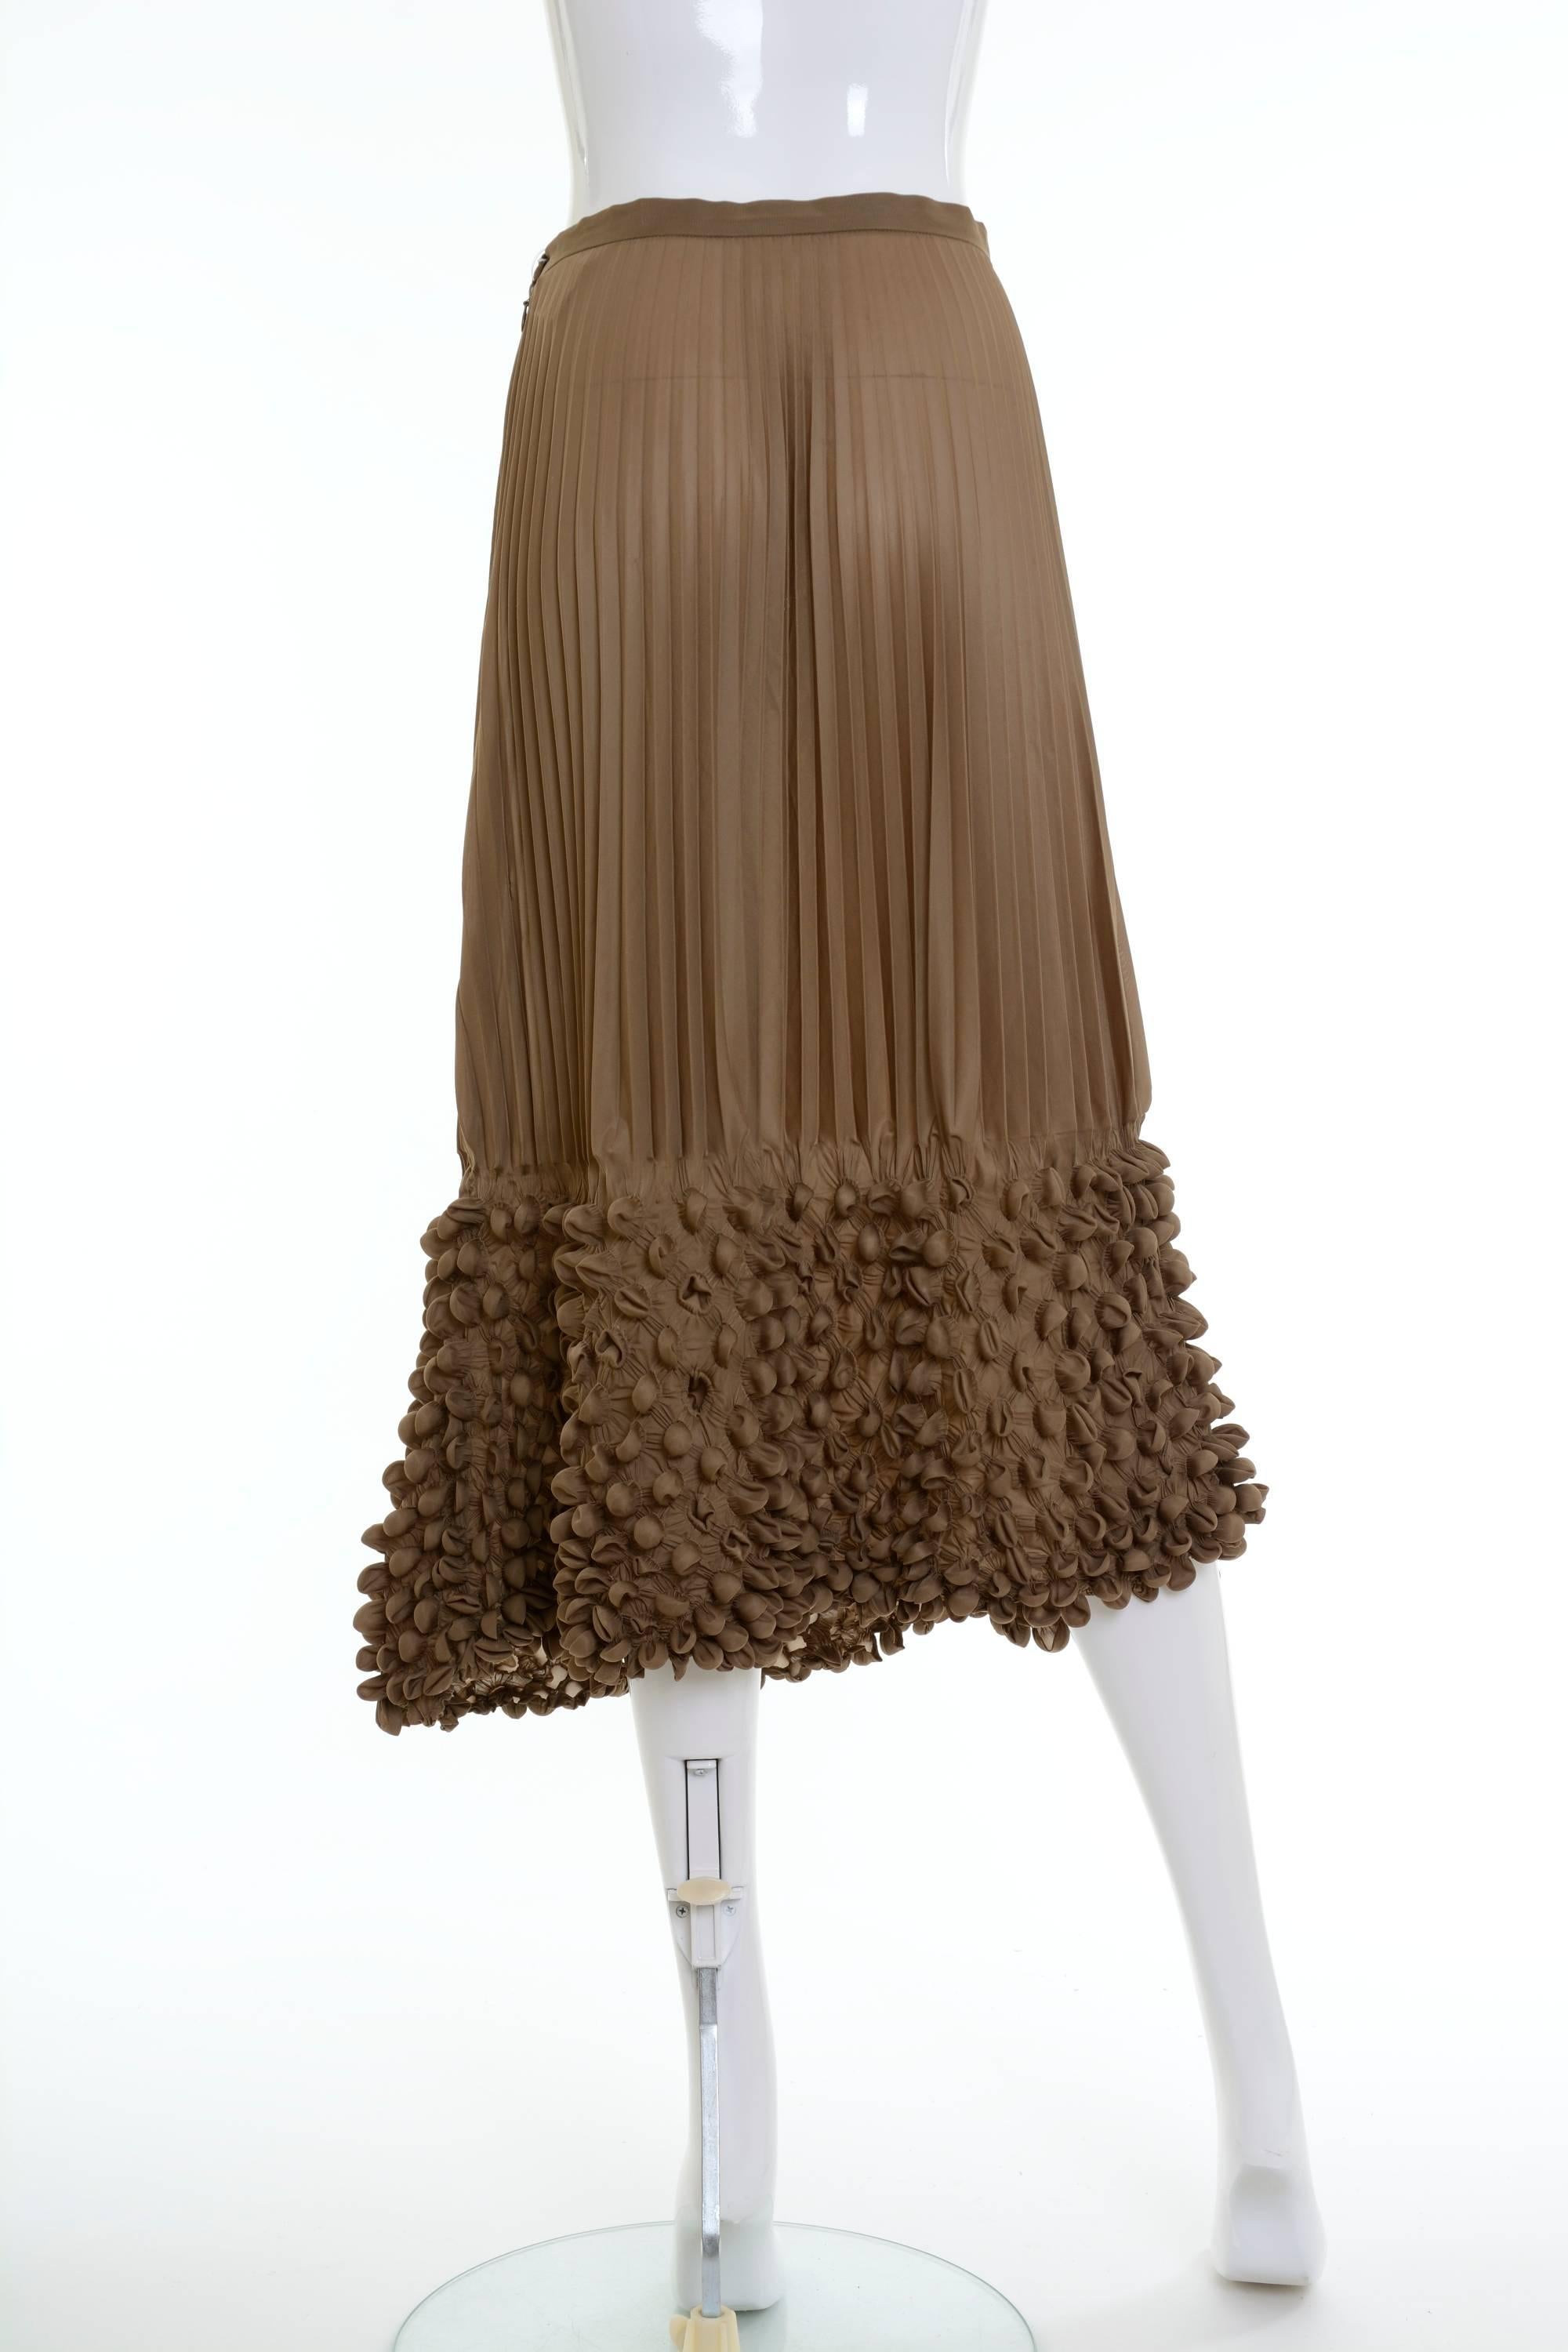 This amazing Issey Miyake skirt is a typical example of the reverse pleating technique he developed in the 1980s. It's in a brown pleated fabric with origami technique details. It has zip and button side closure. 

Excellent vintage